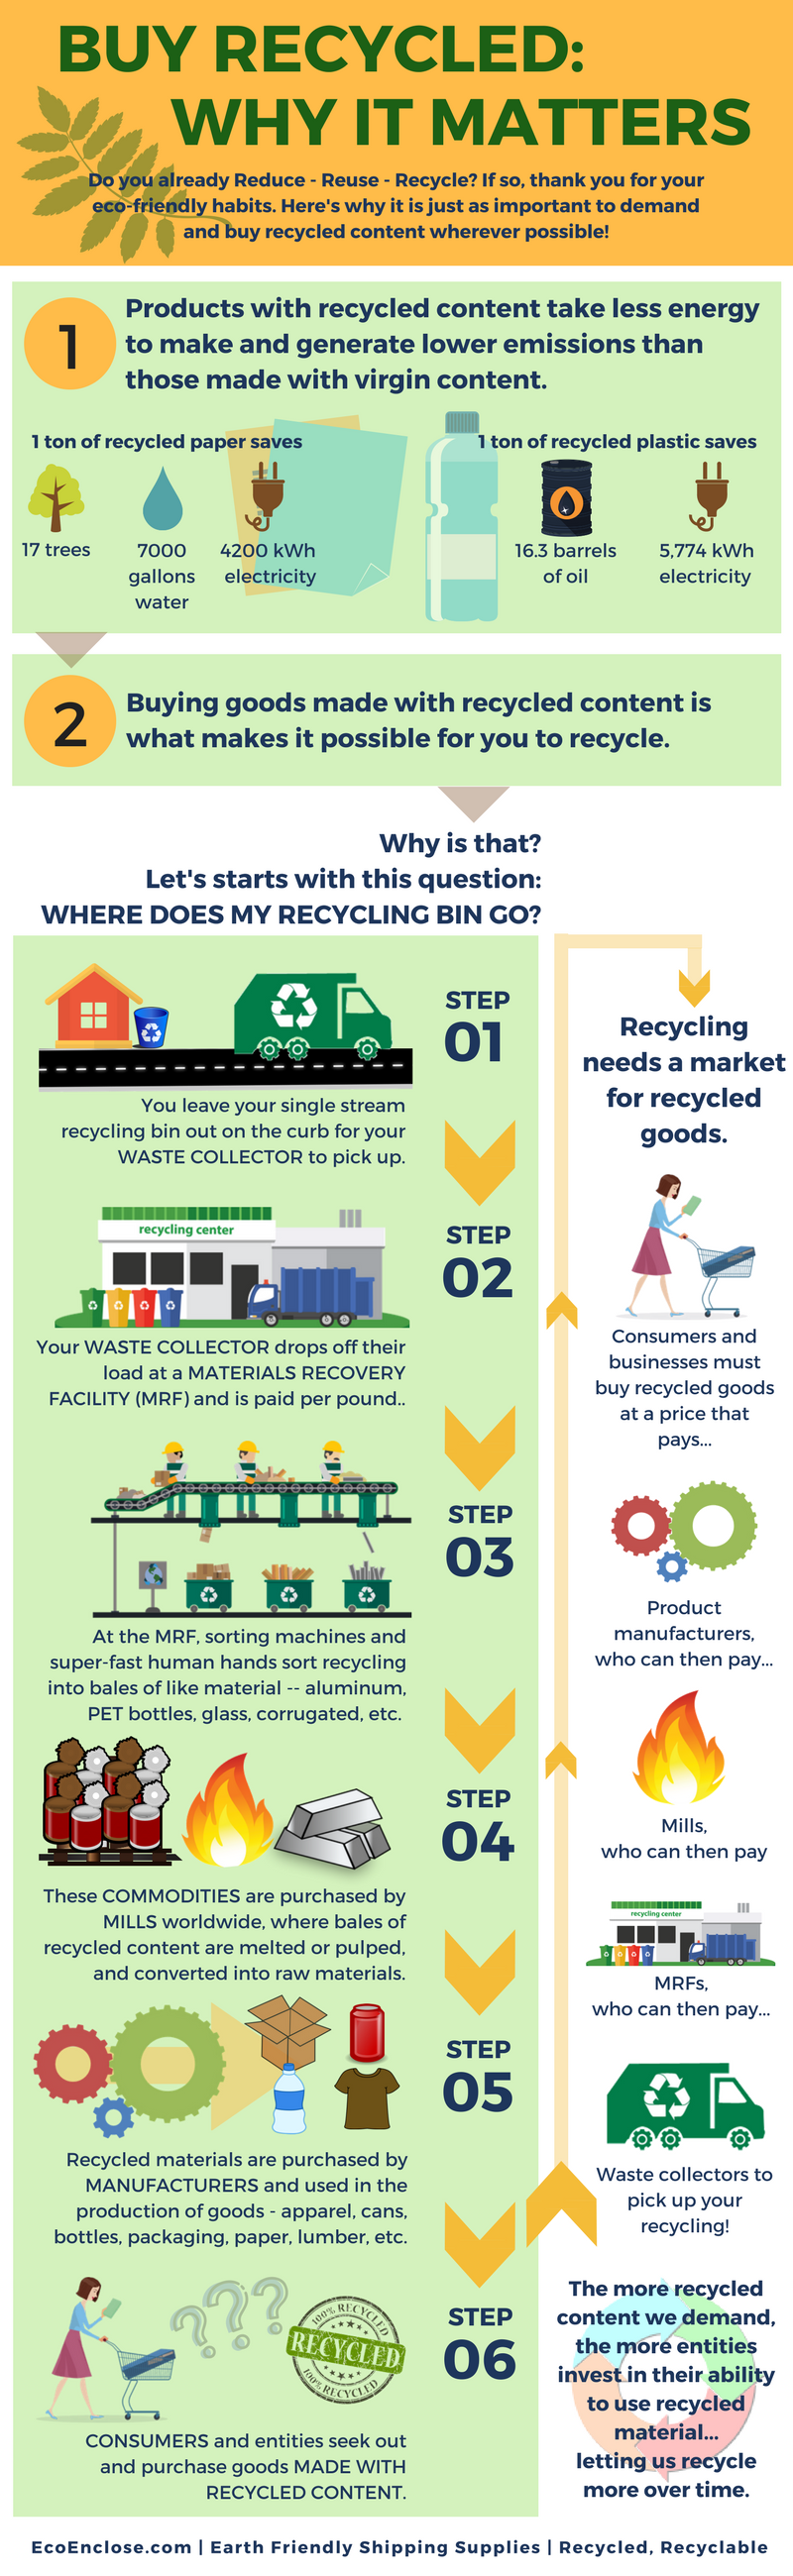 Why Buying Recycled Content Matters